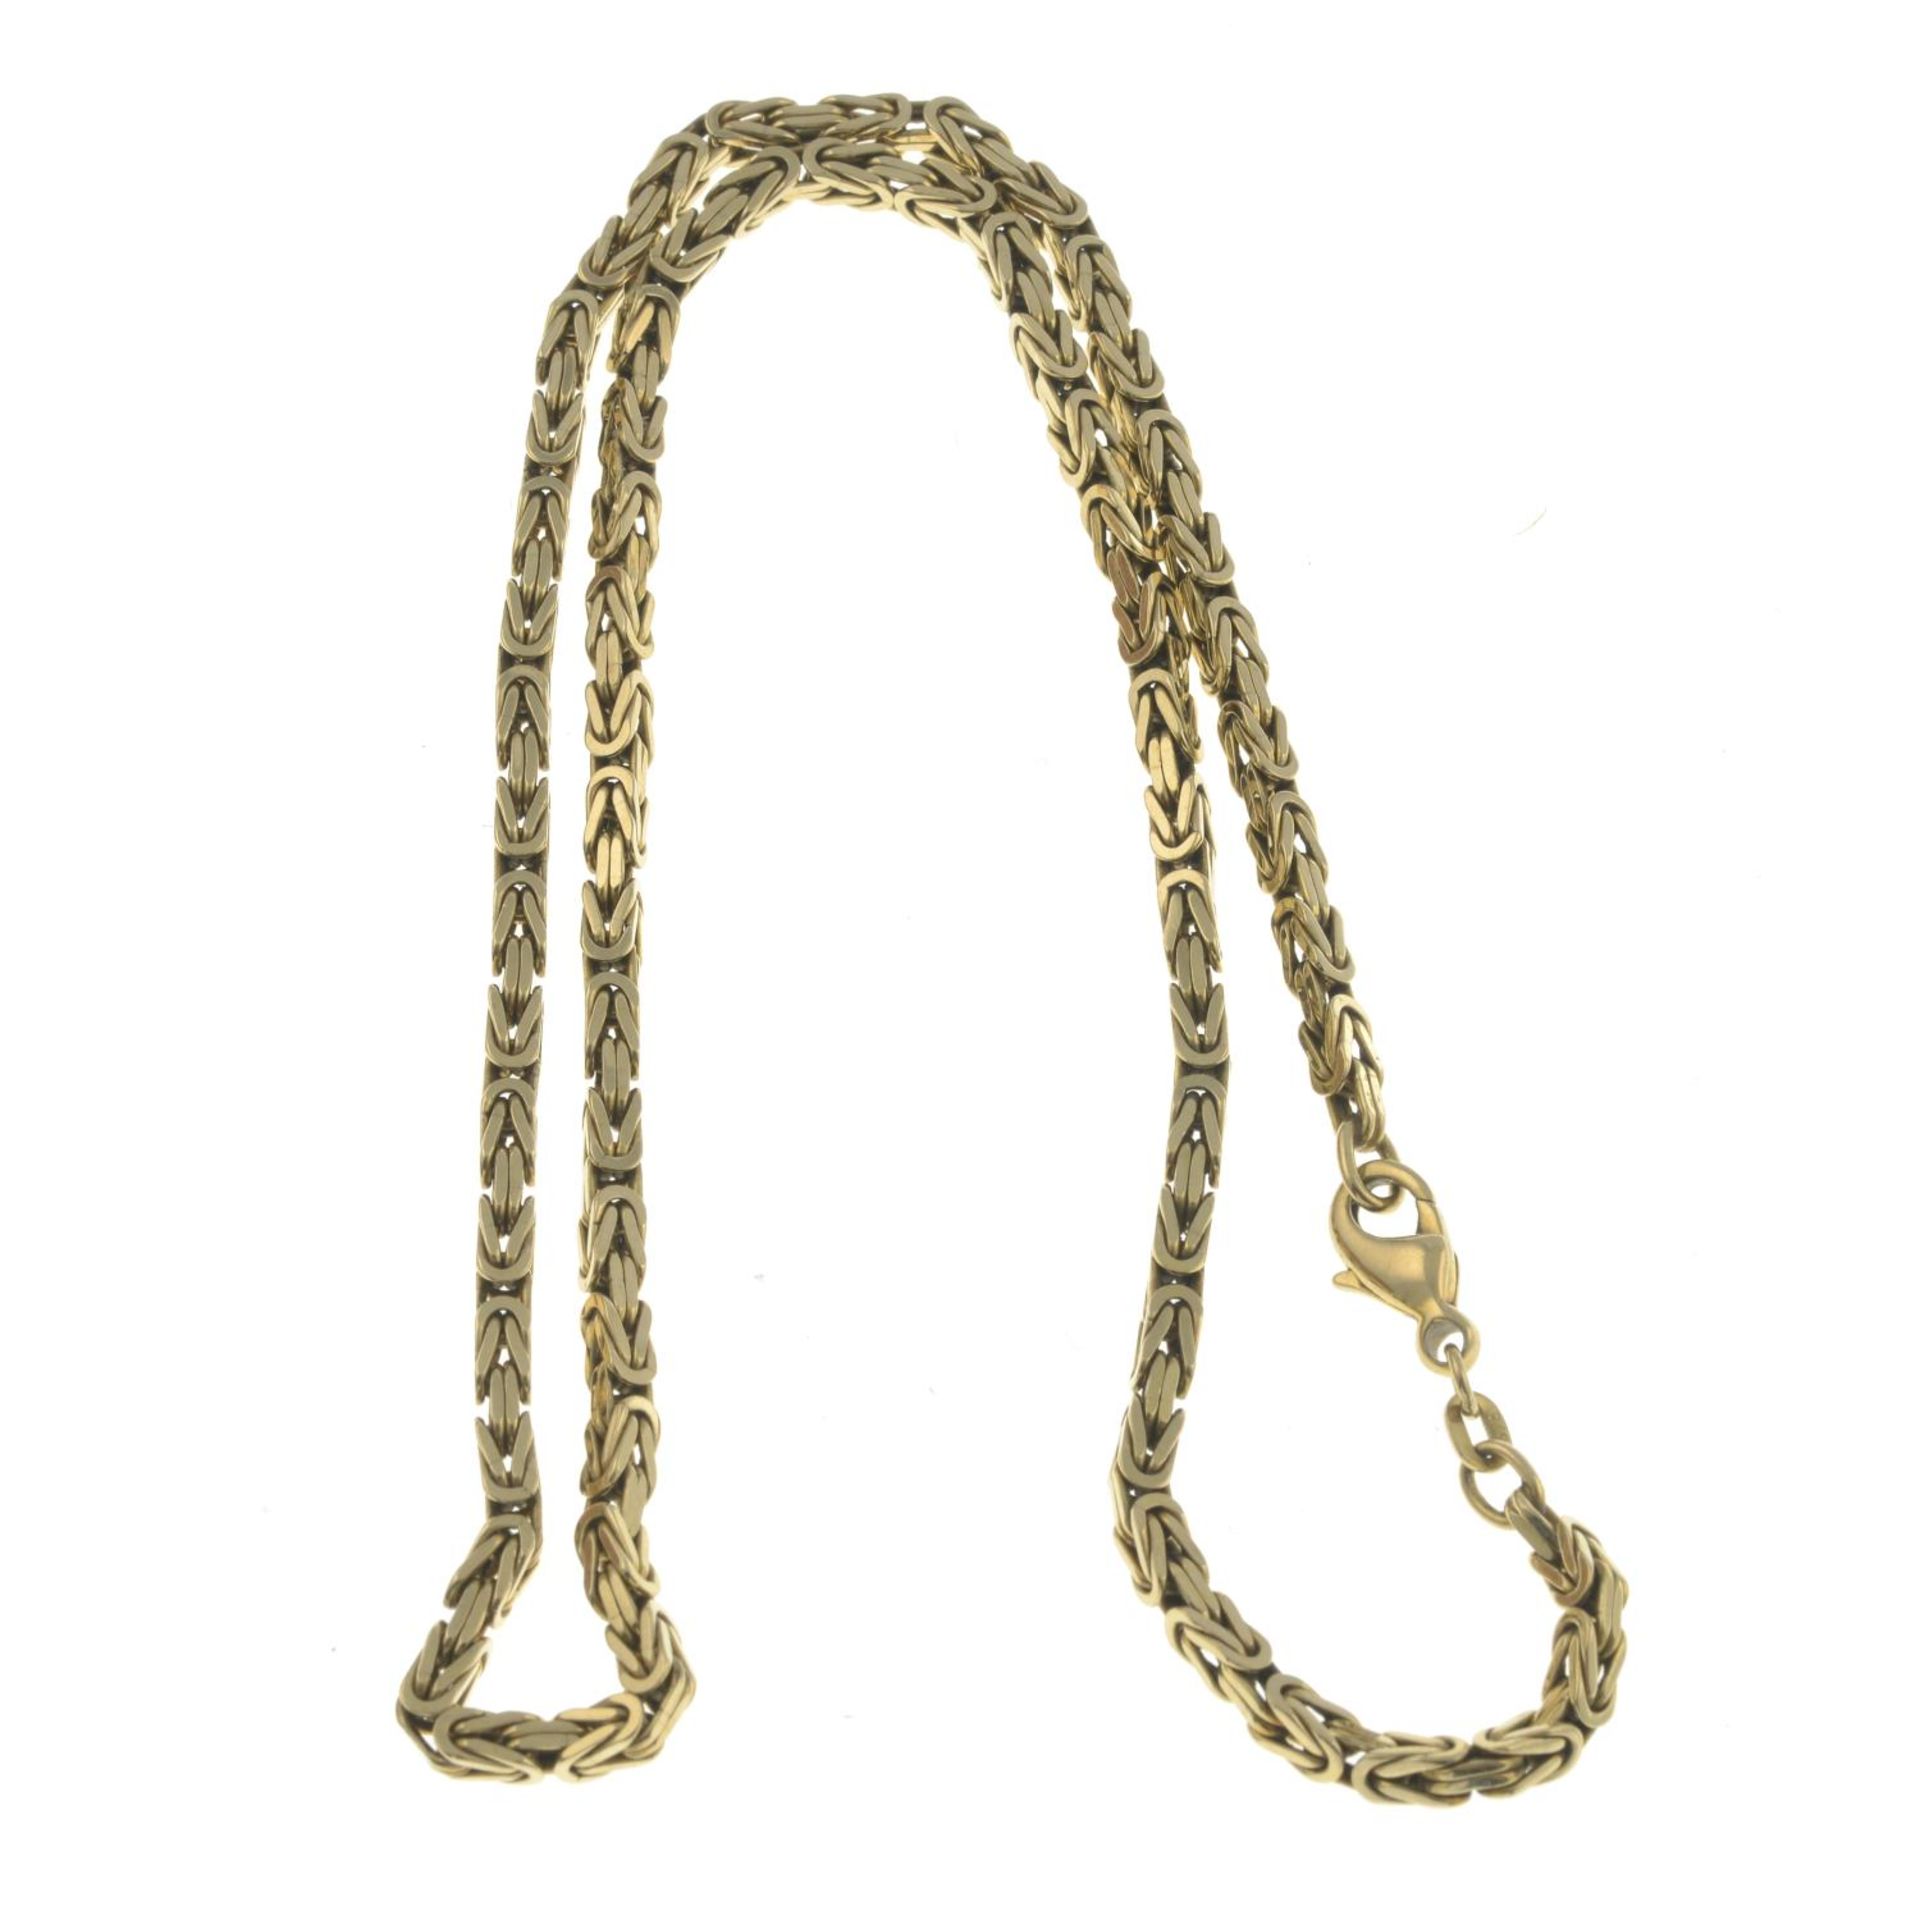 A 9ct gold fancy-link necklace.Hallmarks for 9ct gold. - Image 2 of 2